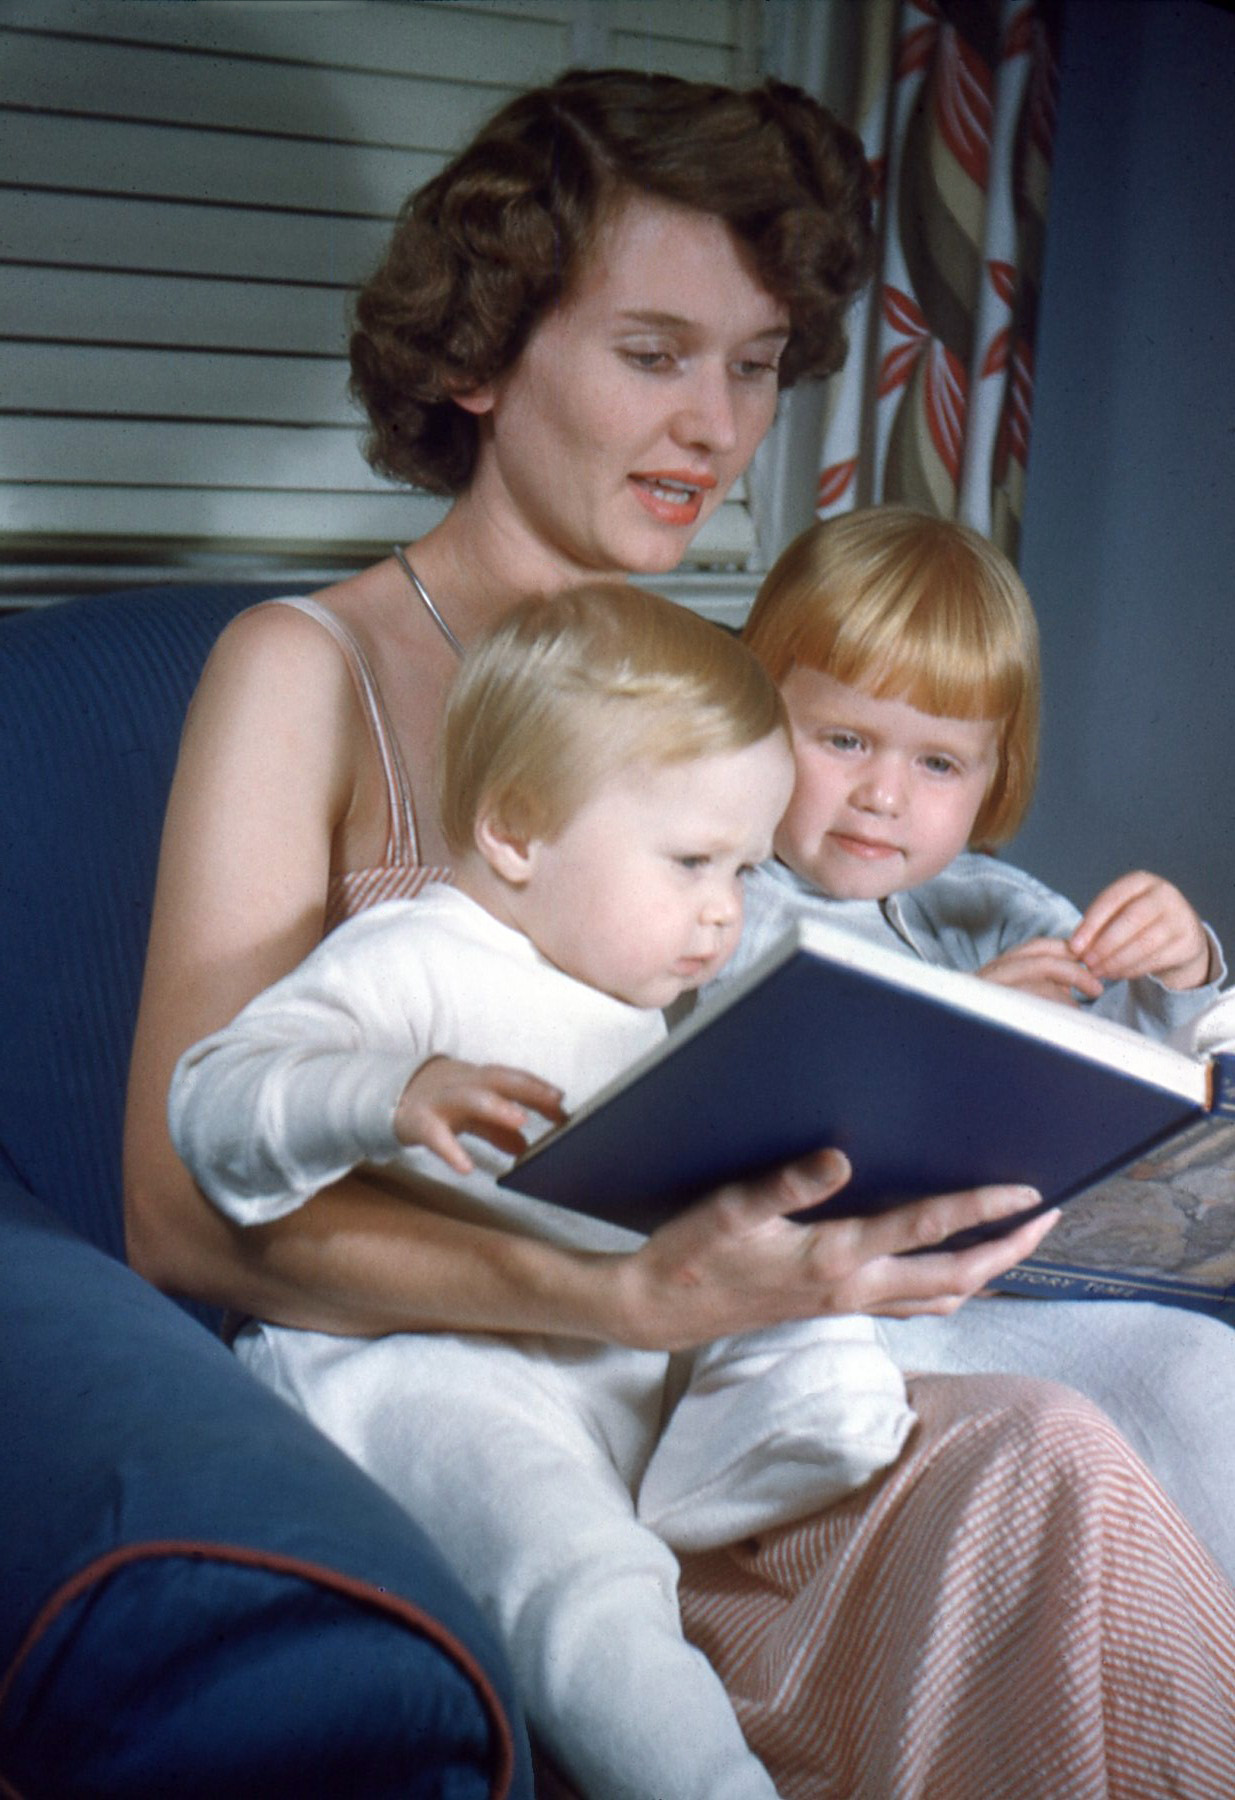 From my dad's old Kodachromes comes this one of my mom, Dorothy Porter, in 1949, reading a bedtime story to my two sisters, June and Madge, at our home in Greenville, S.C..  She is reading from a collection of children's stories that were contained in twelve volumes, called "My Book House".  These sets were sold by door to door salesmen in the 30's, 40's and 50's.  I loved it when Mom read to me from this set of beautifully written and lavishly illustrated stories, but alas, they fell victim to our evolving culture.  Some of the entertaining stories they contained, such as "Little Black Sambo", and Uncle Remus (Joel Chandler Harris) tales came to be regarded as politically insensitive and so were deleted from the American lexicon of acceptable children's literature. View full size.